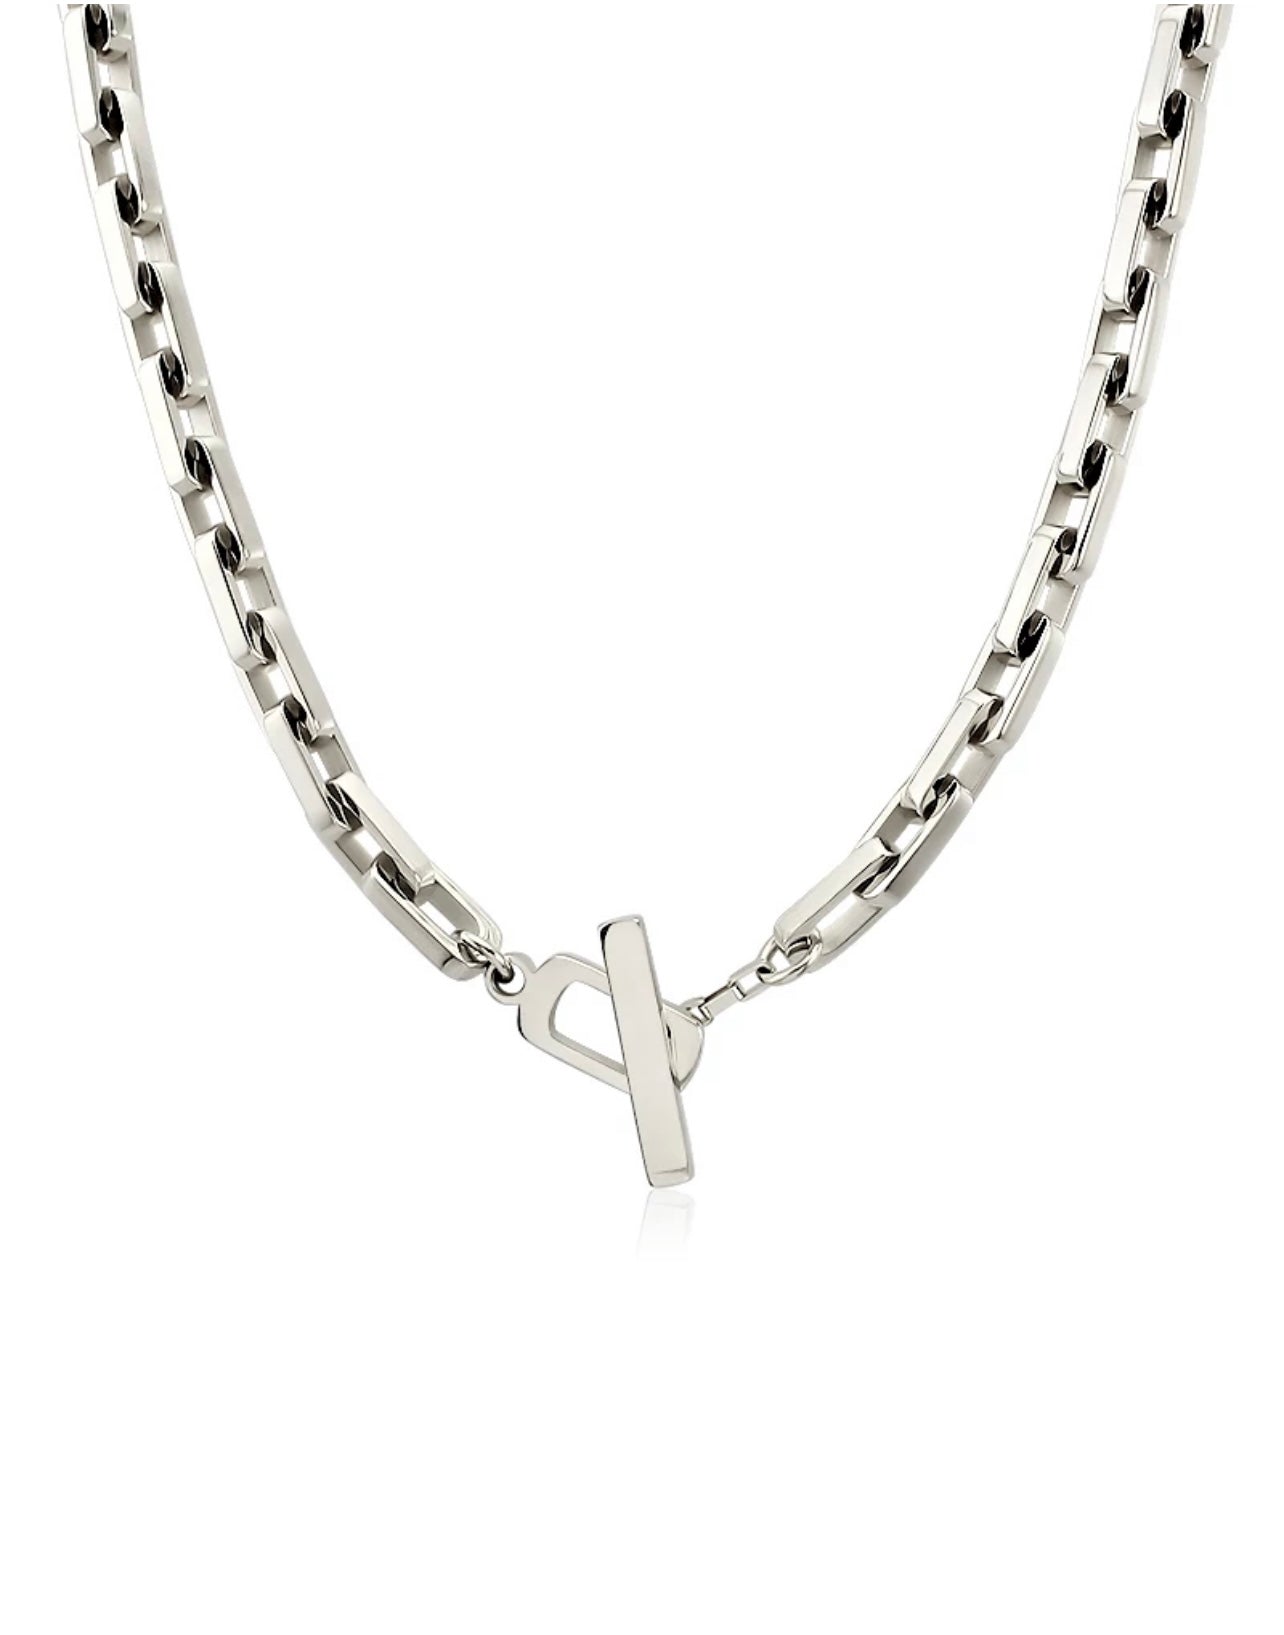 T BUCKLE NECKLACE